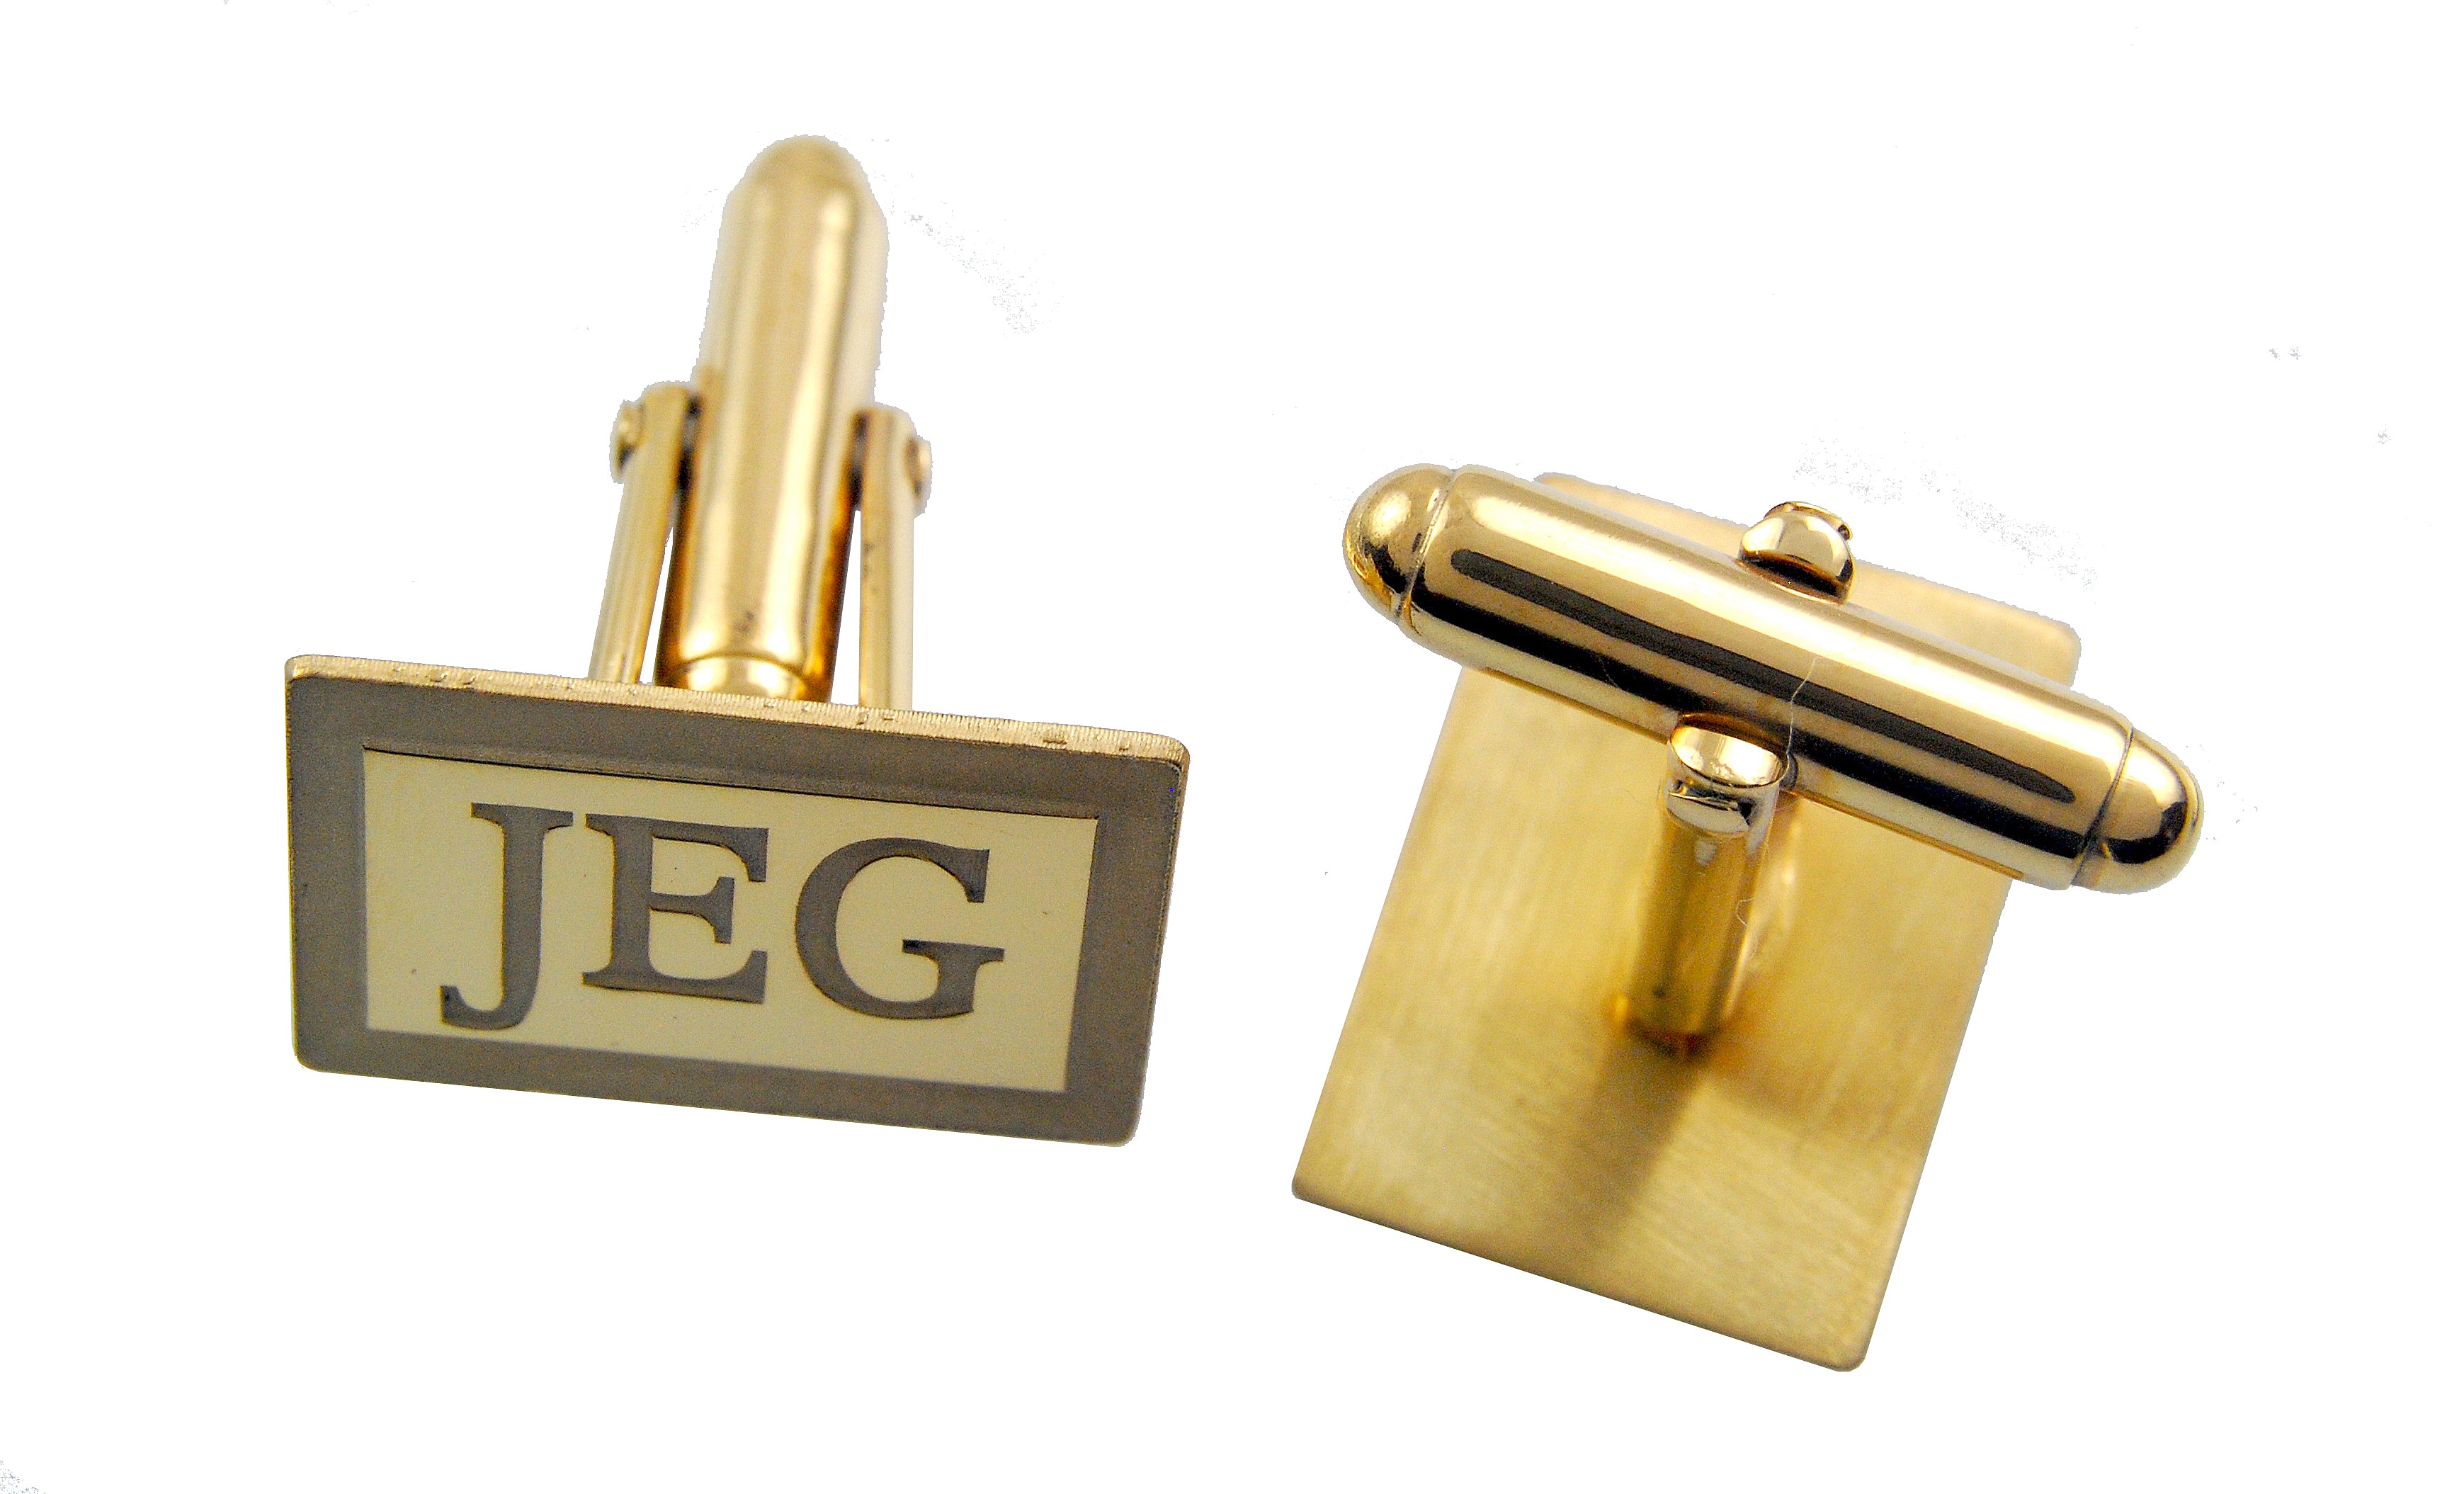 14k Yellow 14k White Gold Sterling Silver Rectangle Cufflinks Cuff Links Personalized Monogram